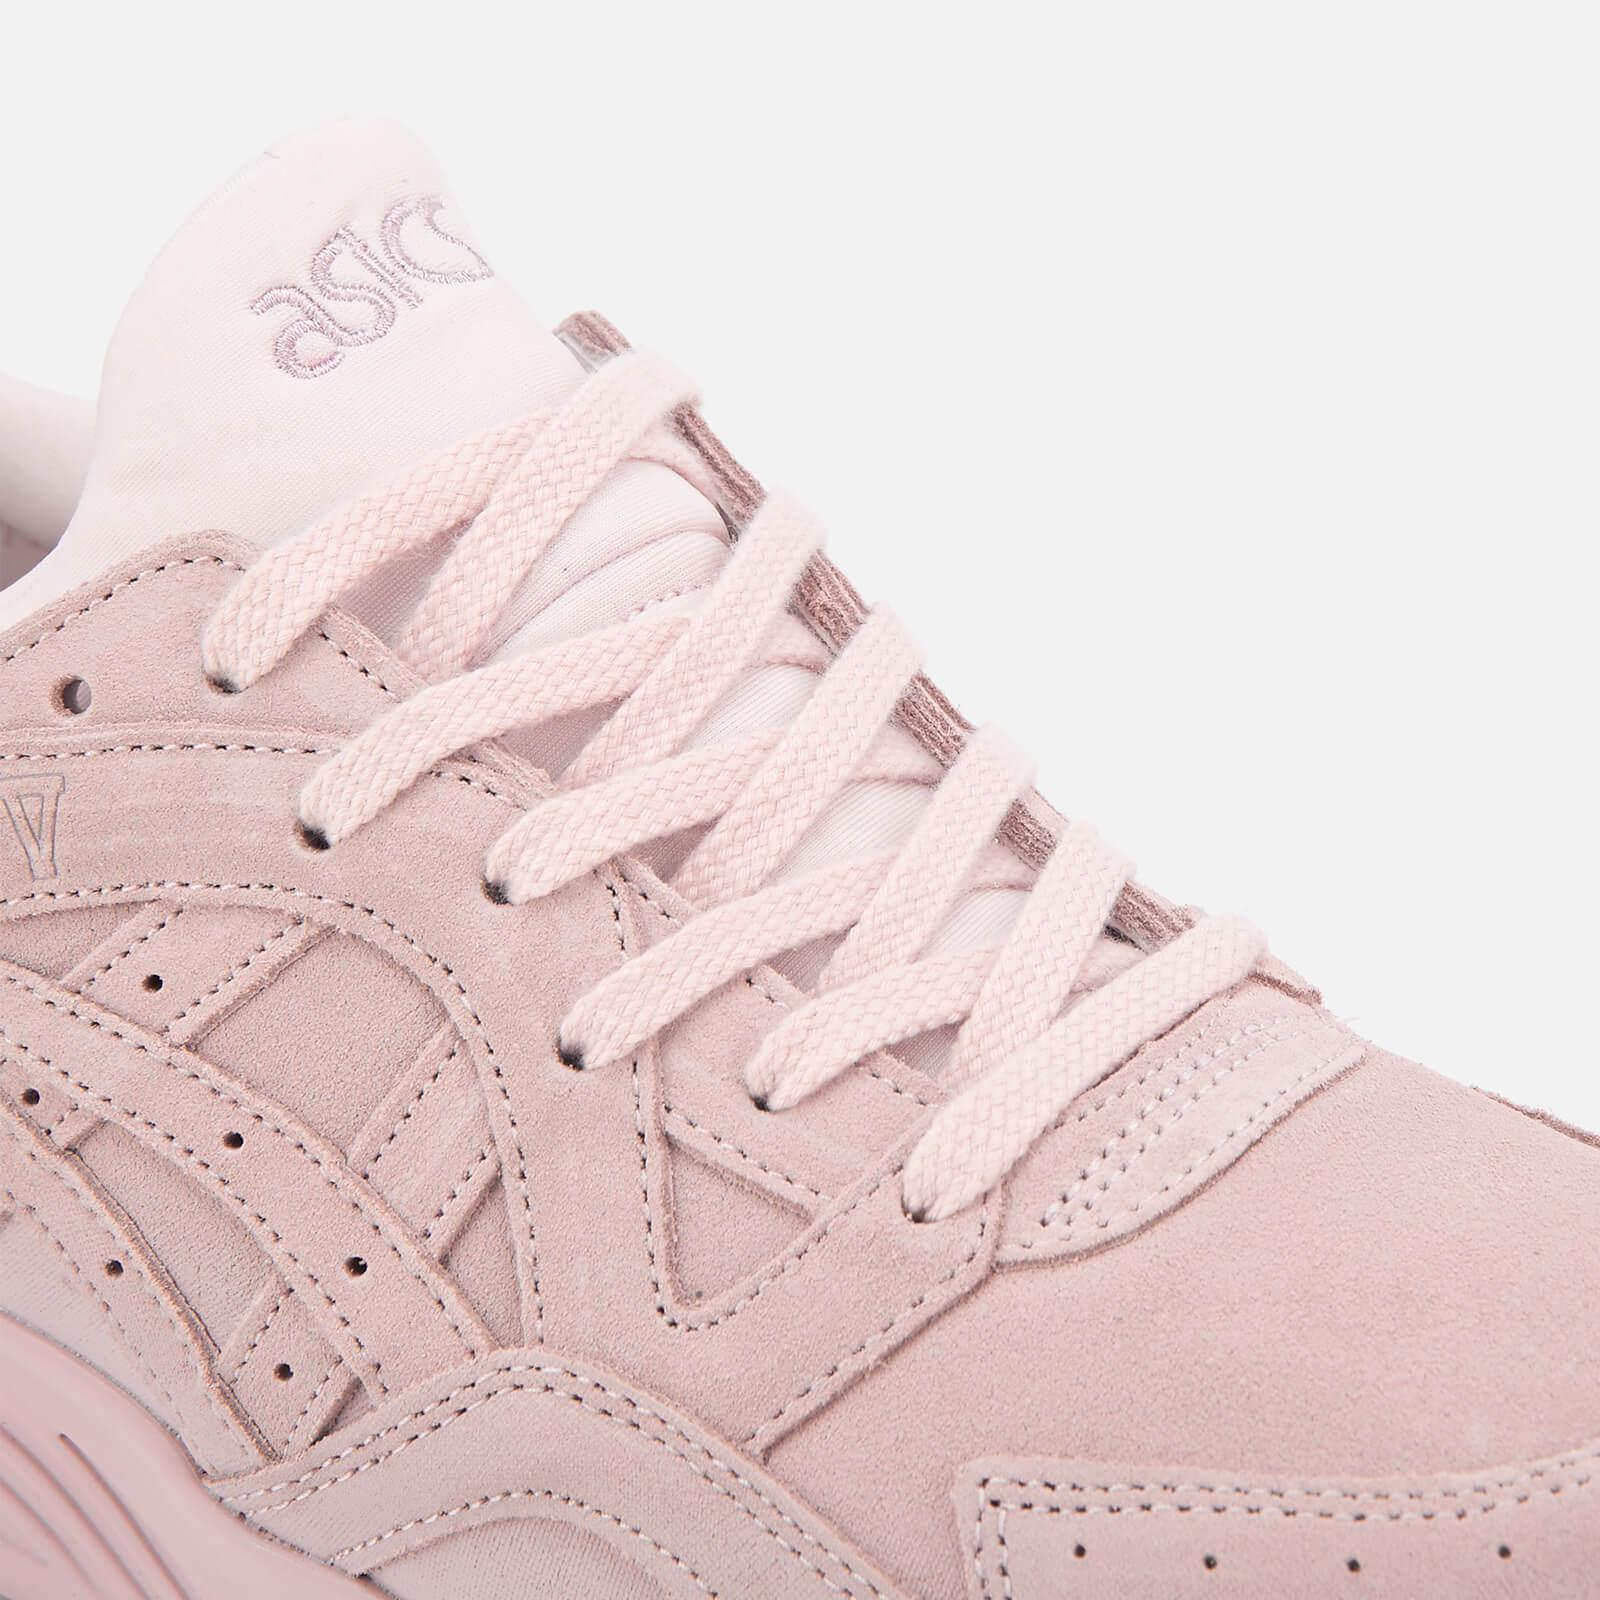 Asics Gel-lyte V Suede Trainers in Pink | Lyst